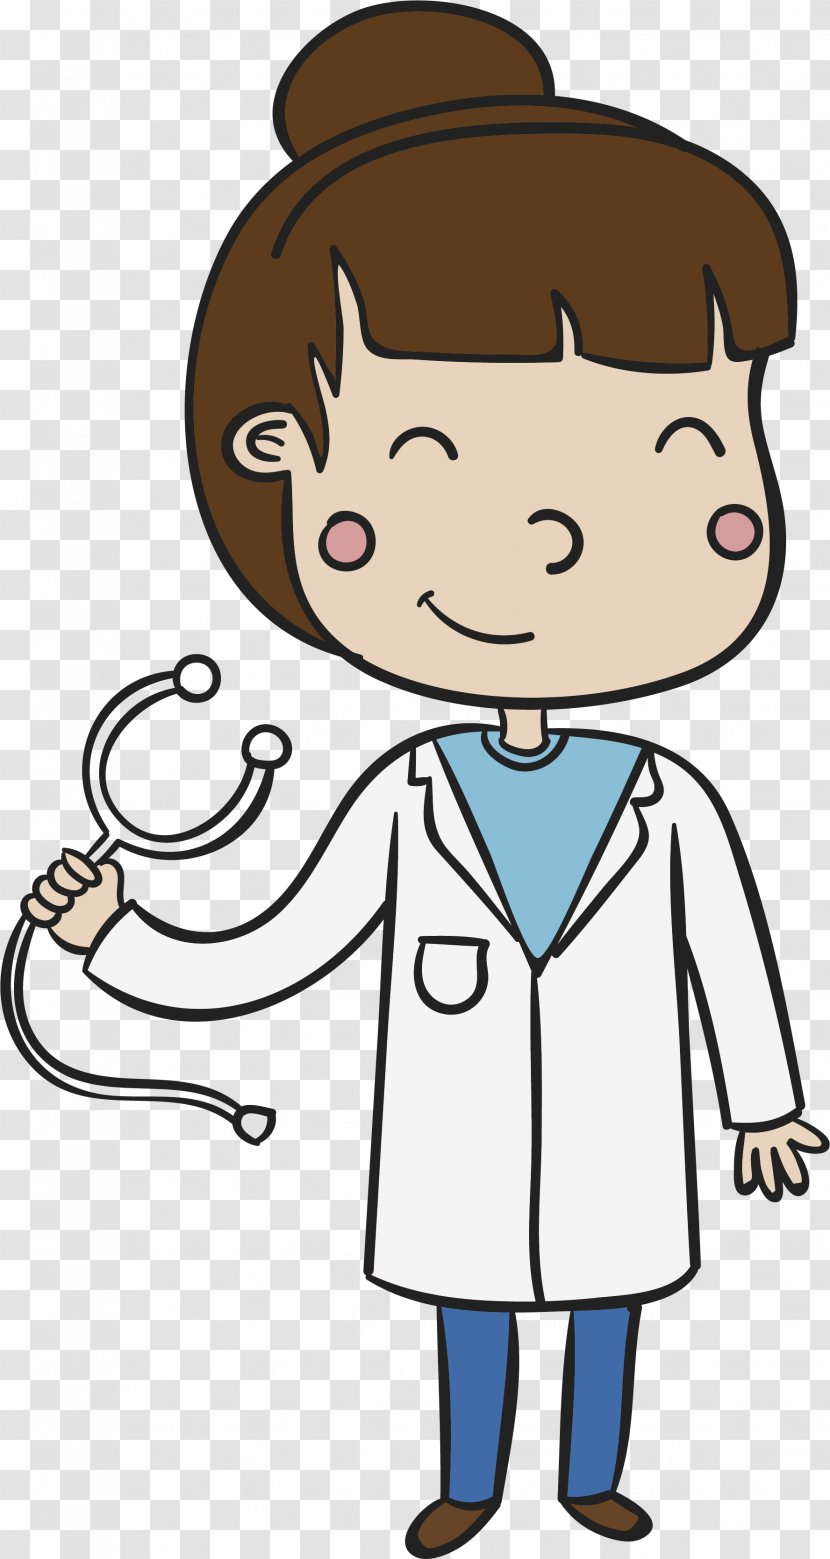 Physician Clip Art - Tree - Cartoon Smile Female Doctor Transparent PNG